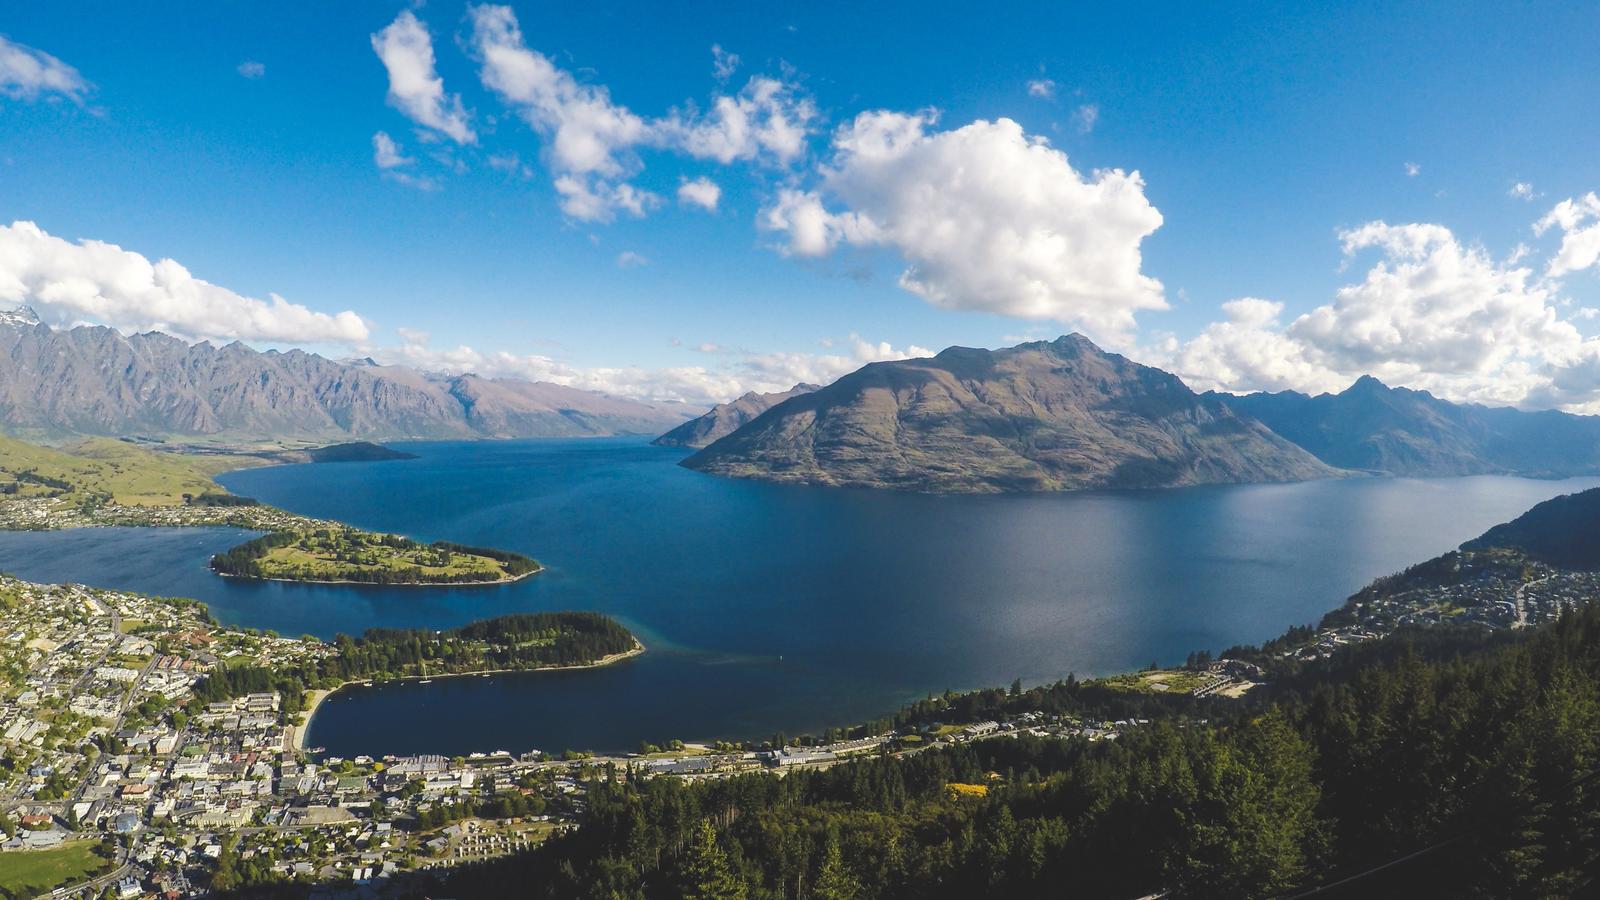 Curate Your Ultimate Travel Wish List ✈️ Covering the Entire Alphabet and We’ll Reveal If You’re Left- Or Right-Brained New Zealand